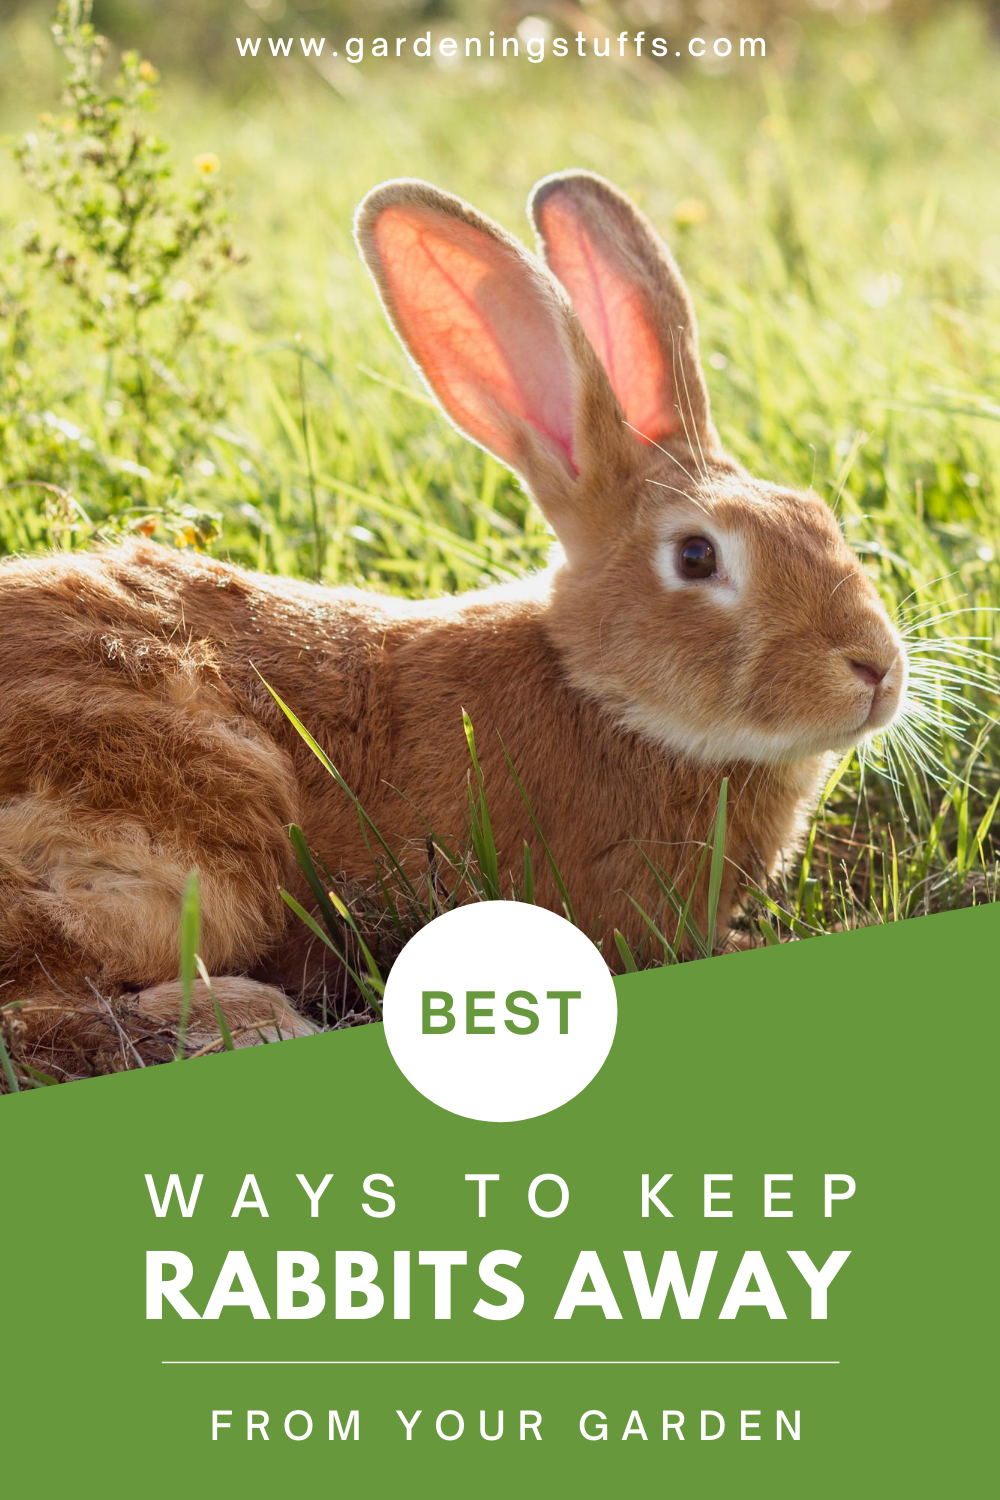 If you do not wish much destruction on your crops, look out for the ways to keep rabbits out of your garden.